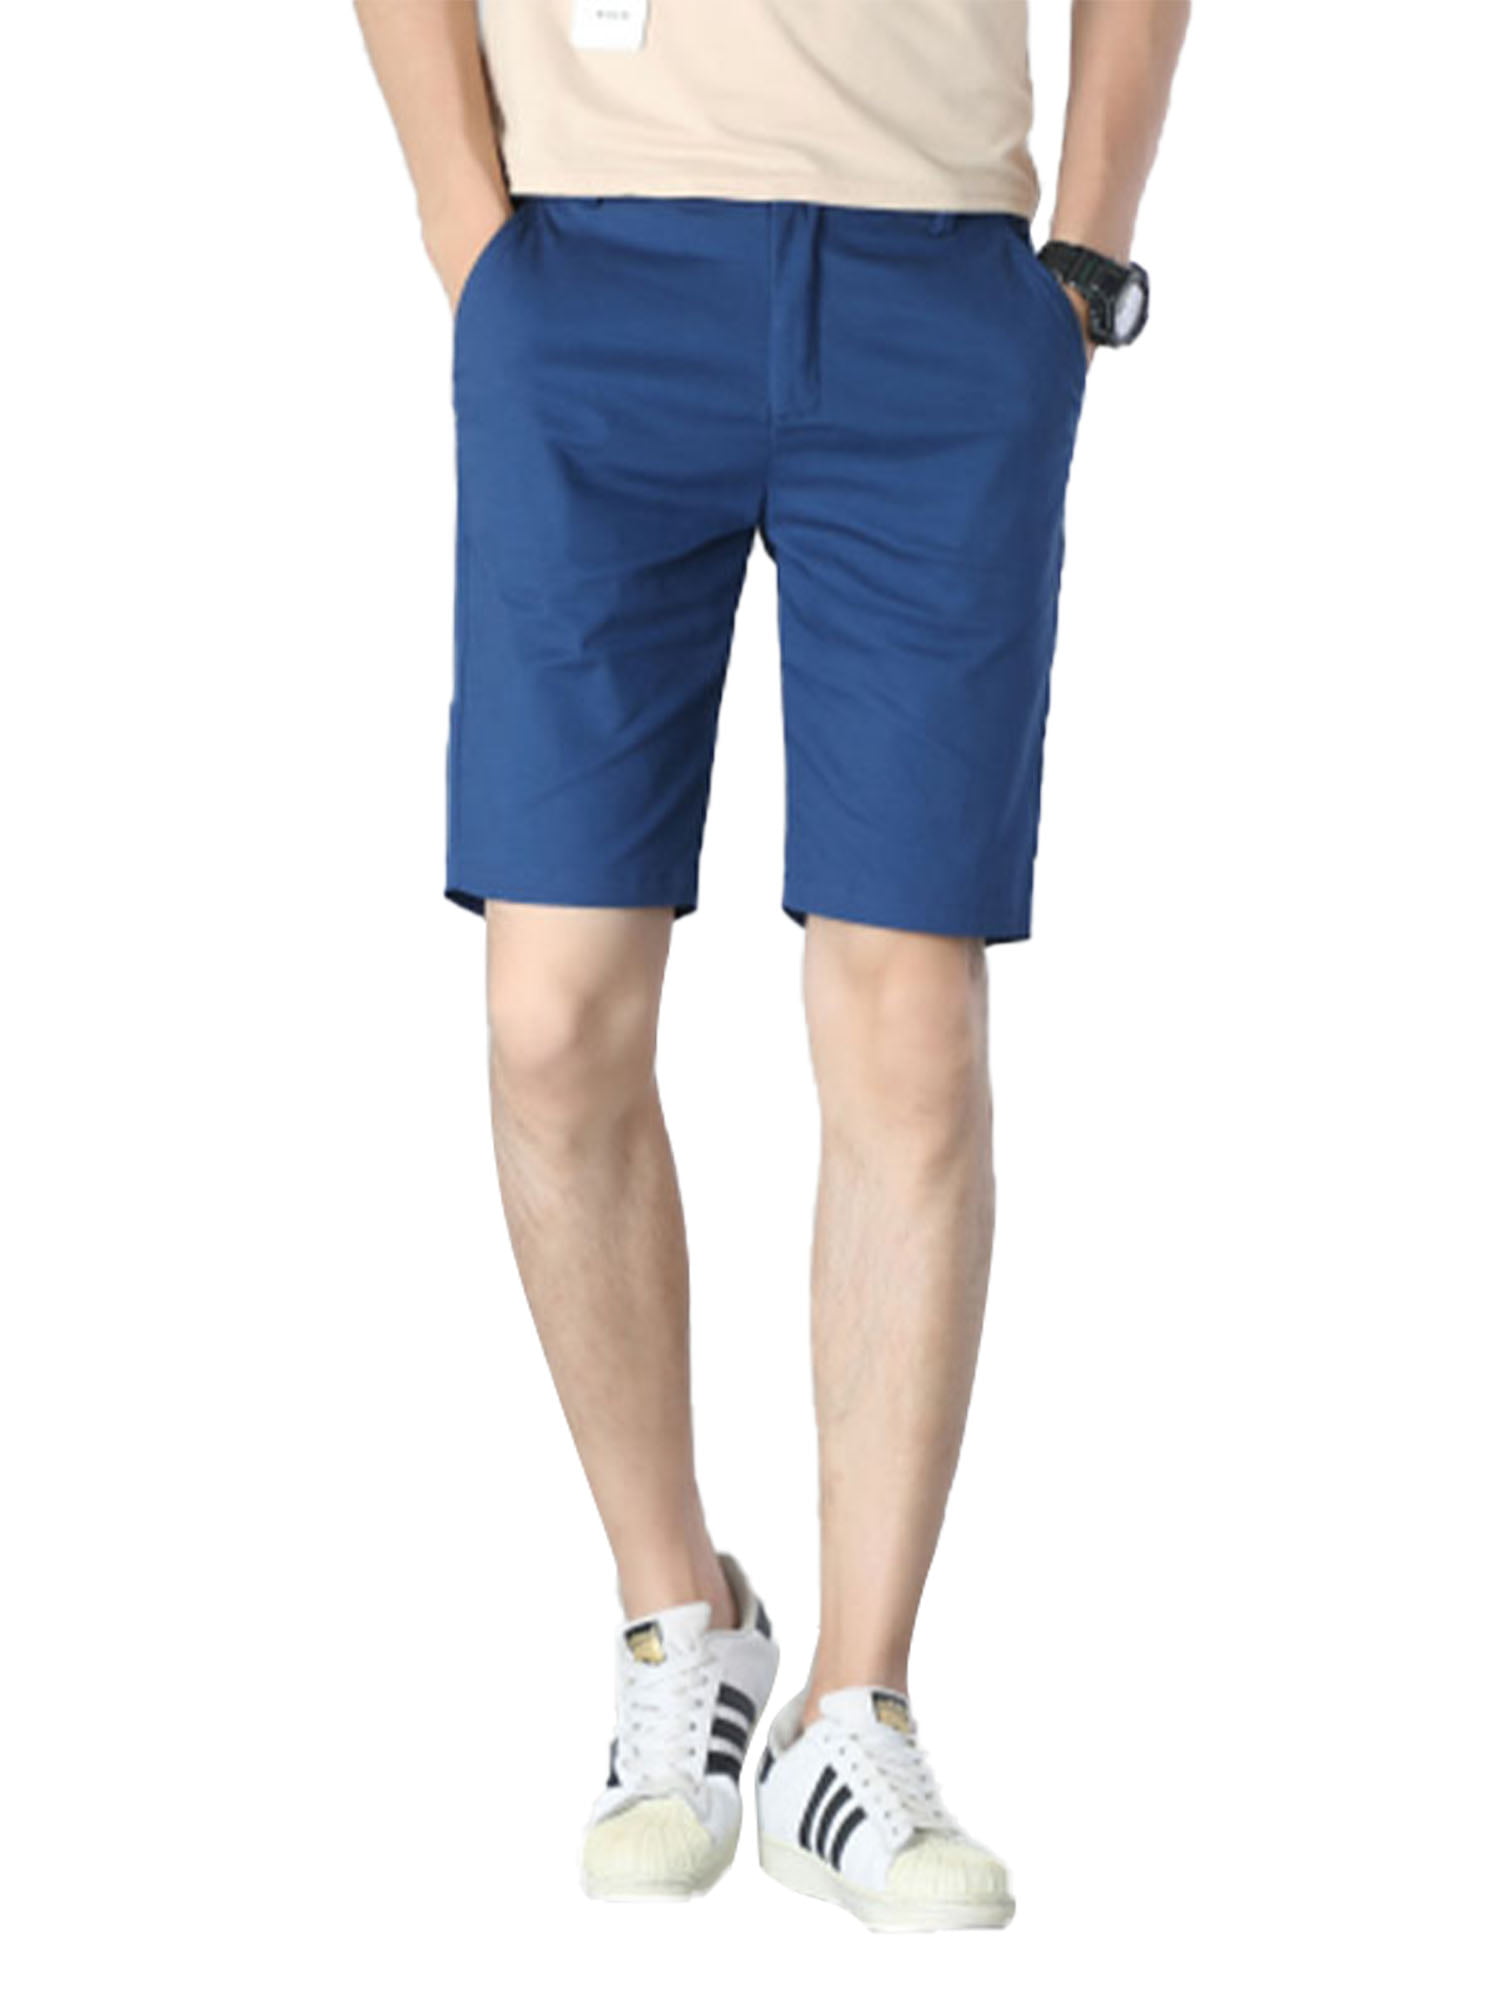 slim fit pants for short guys with